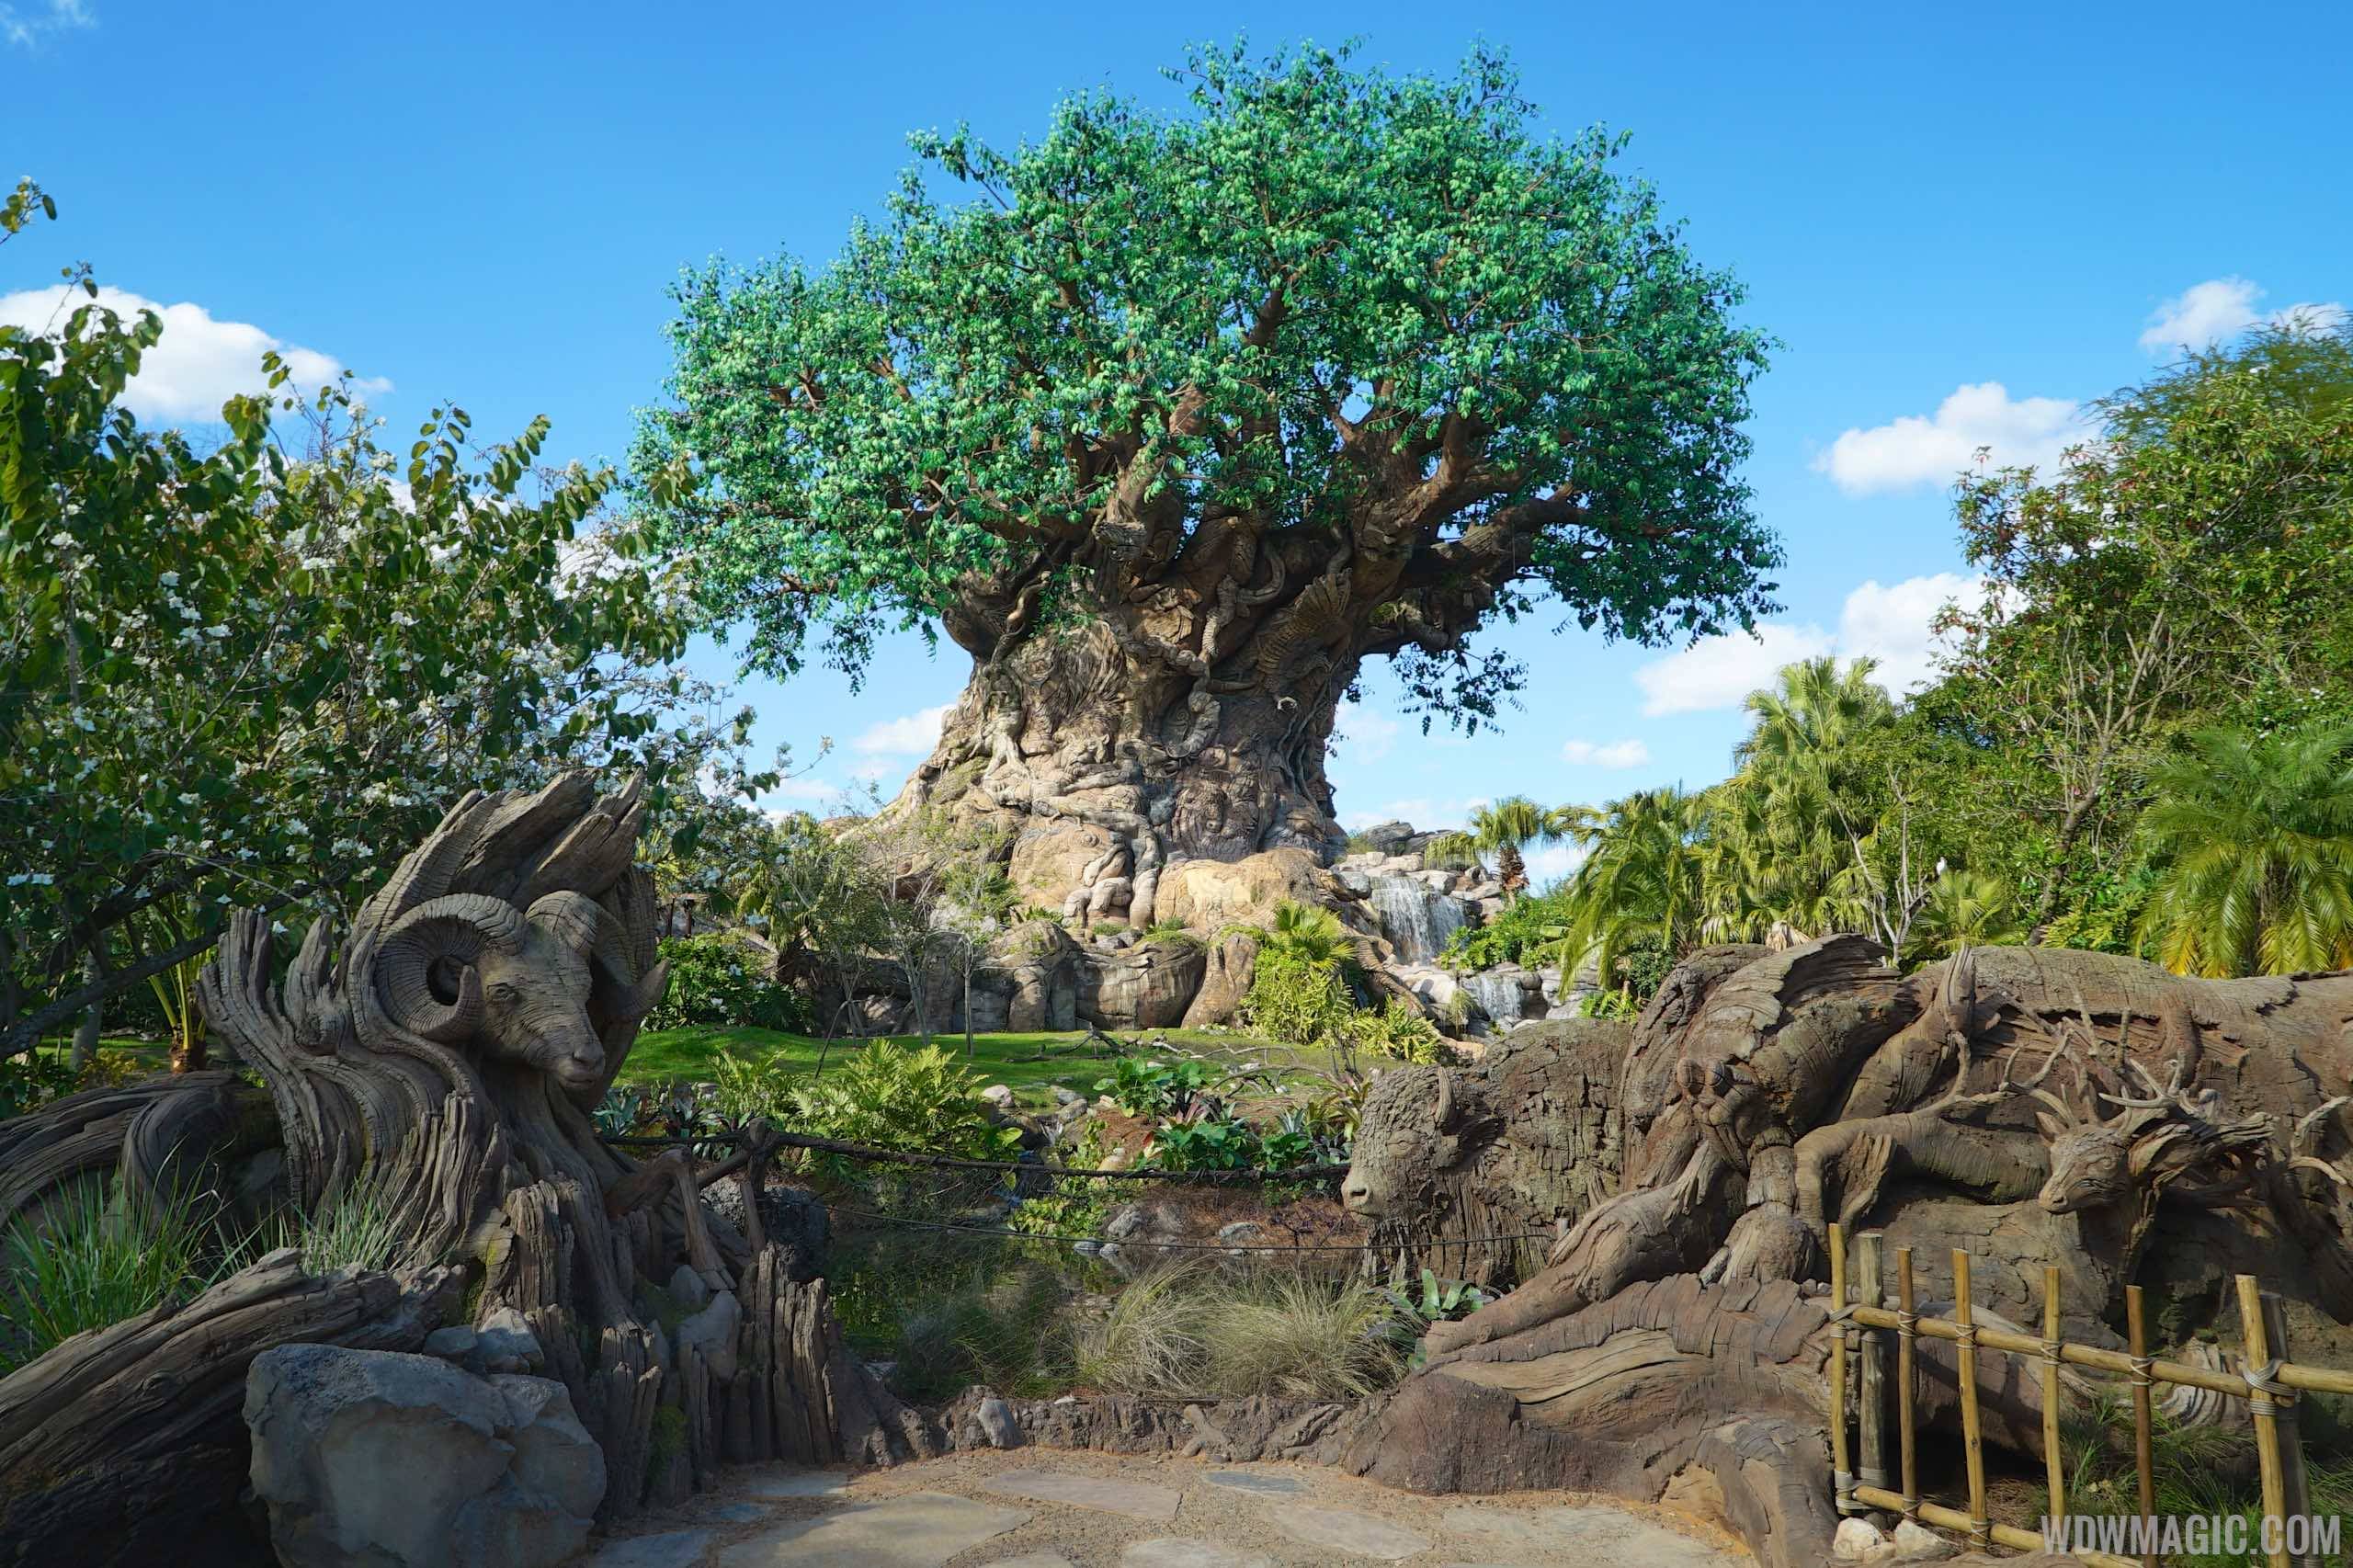 Disney's Animal Kingdom has seen an increase in hours during November